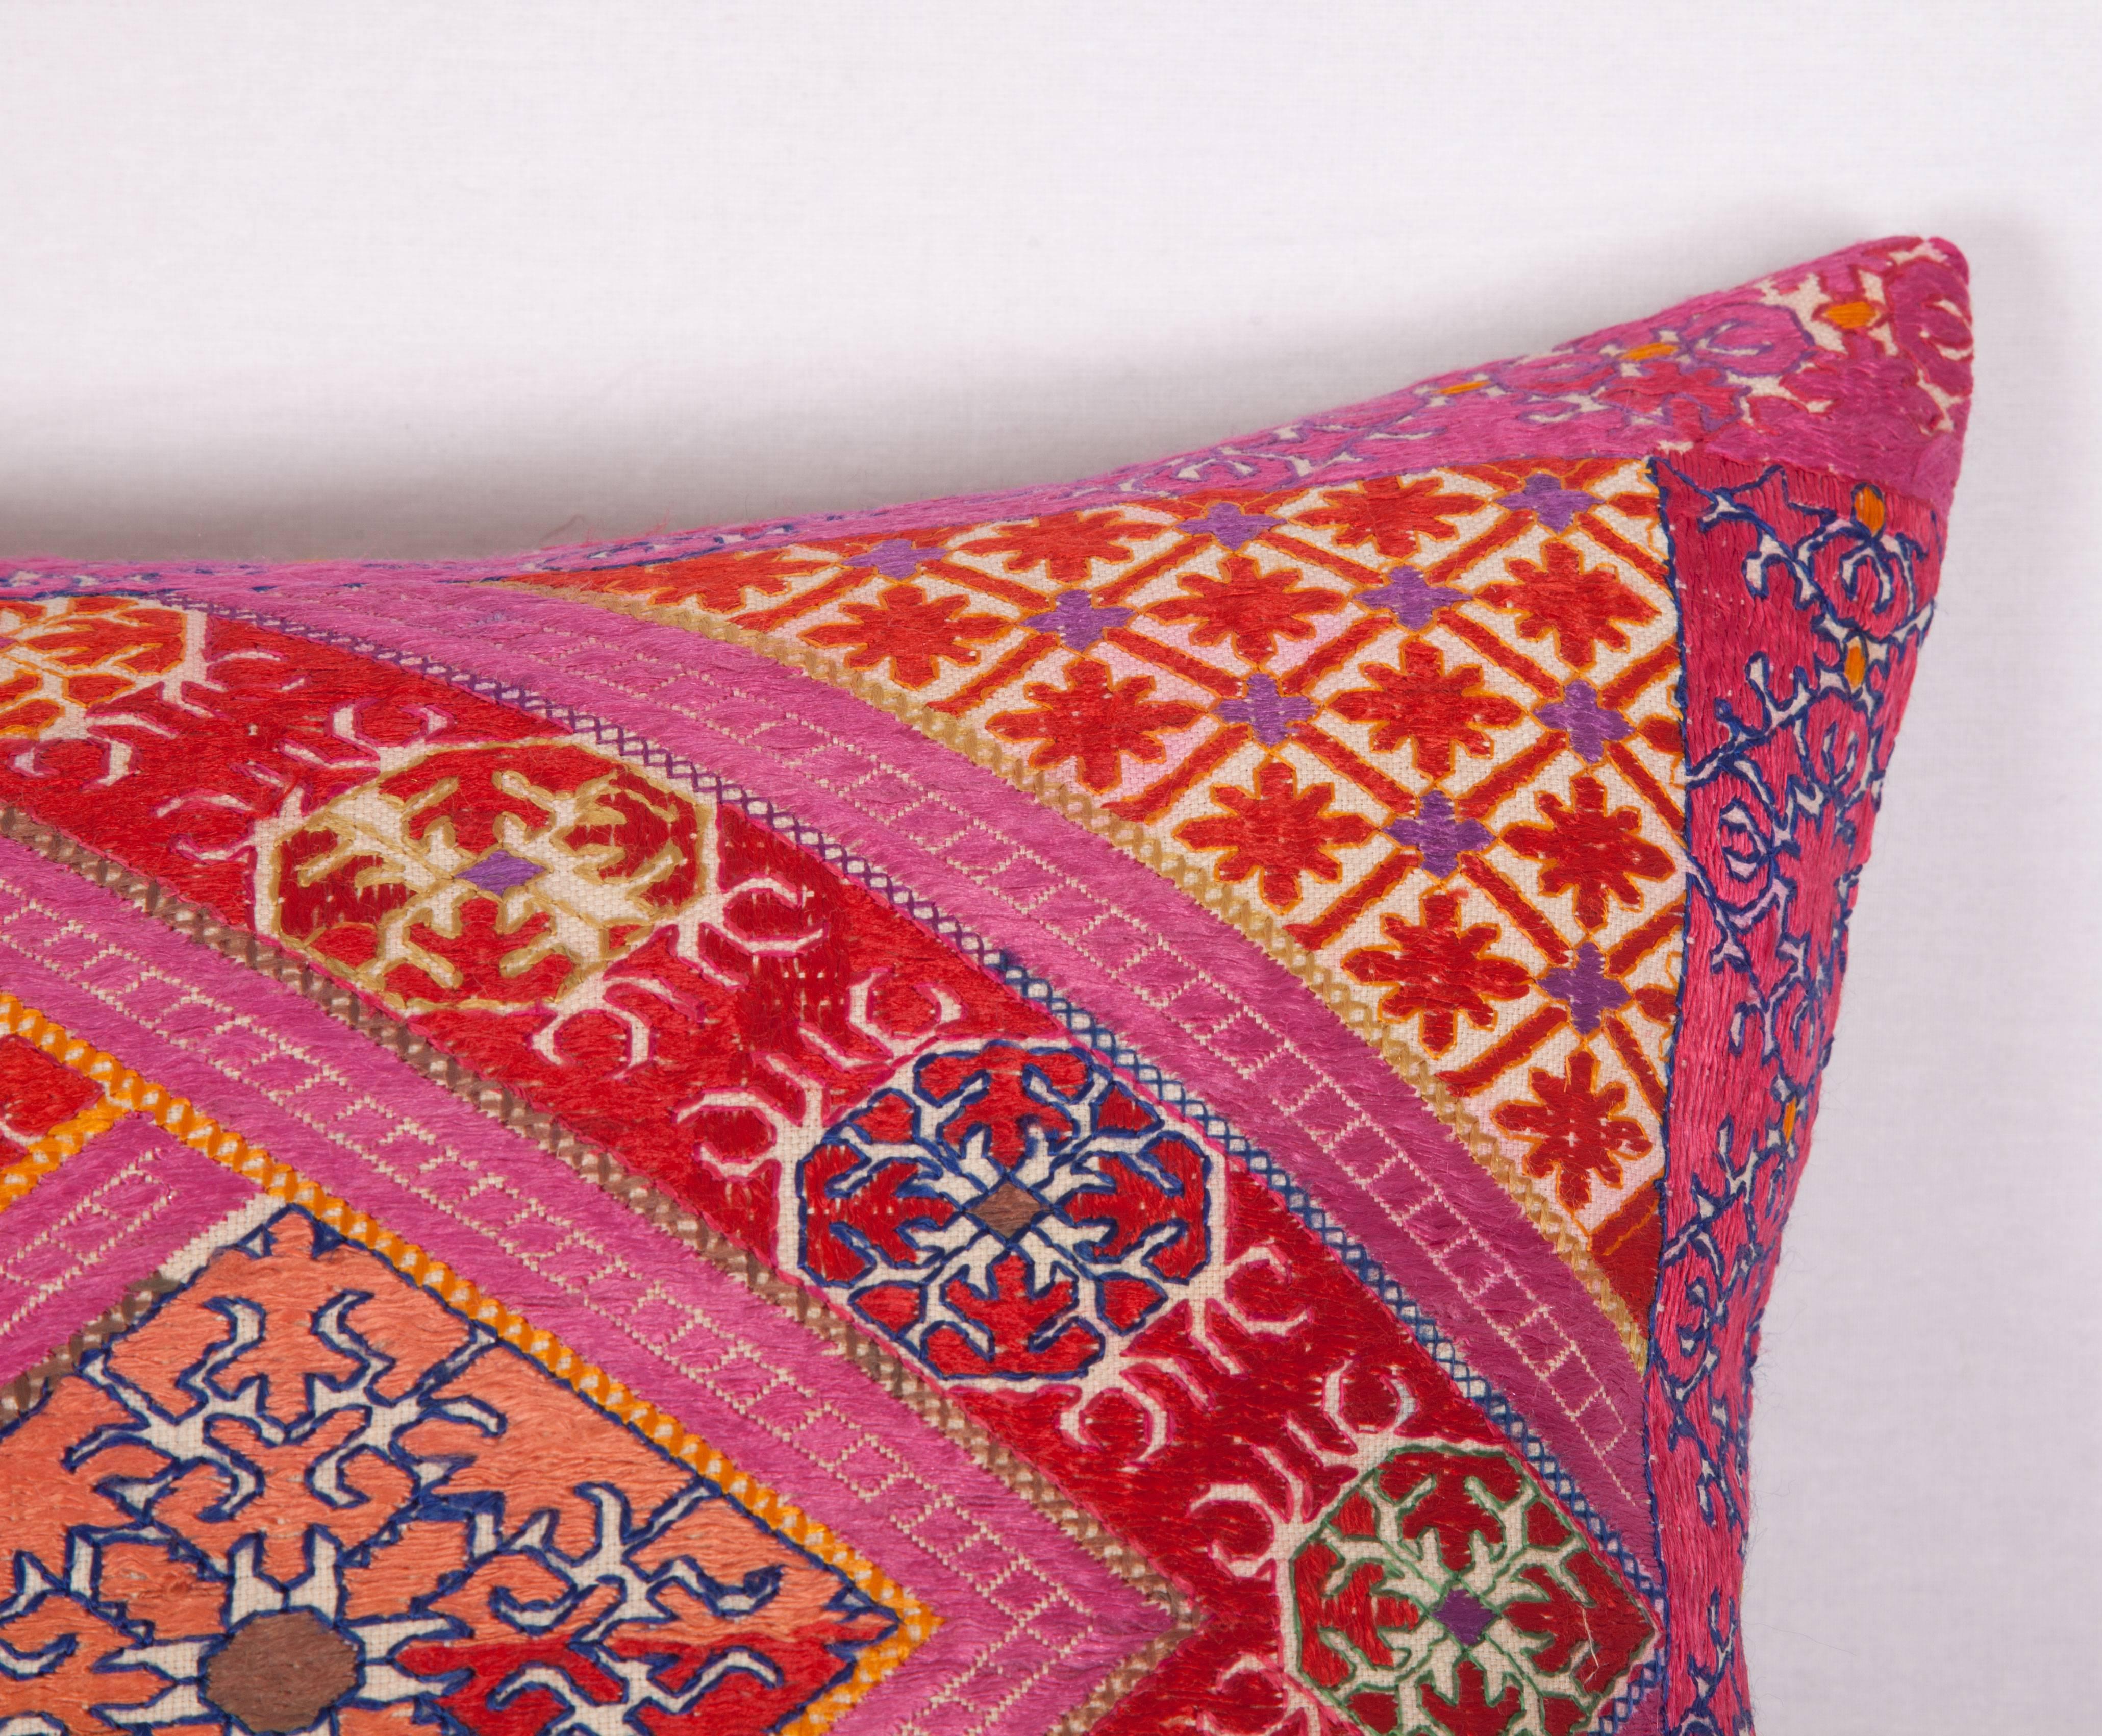 Embroidered Pillow Made Out of a Mid-20th Century Swat Embroidery